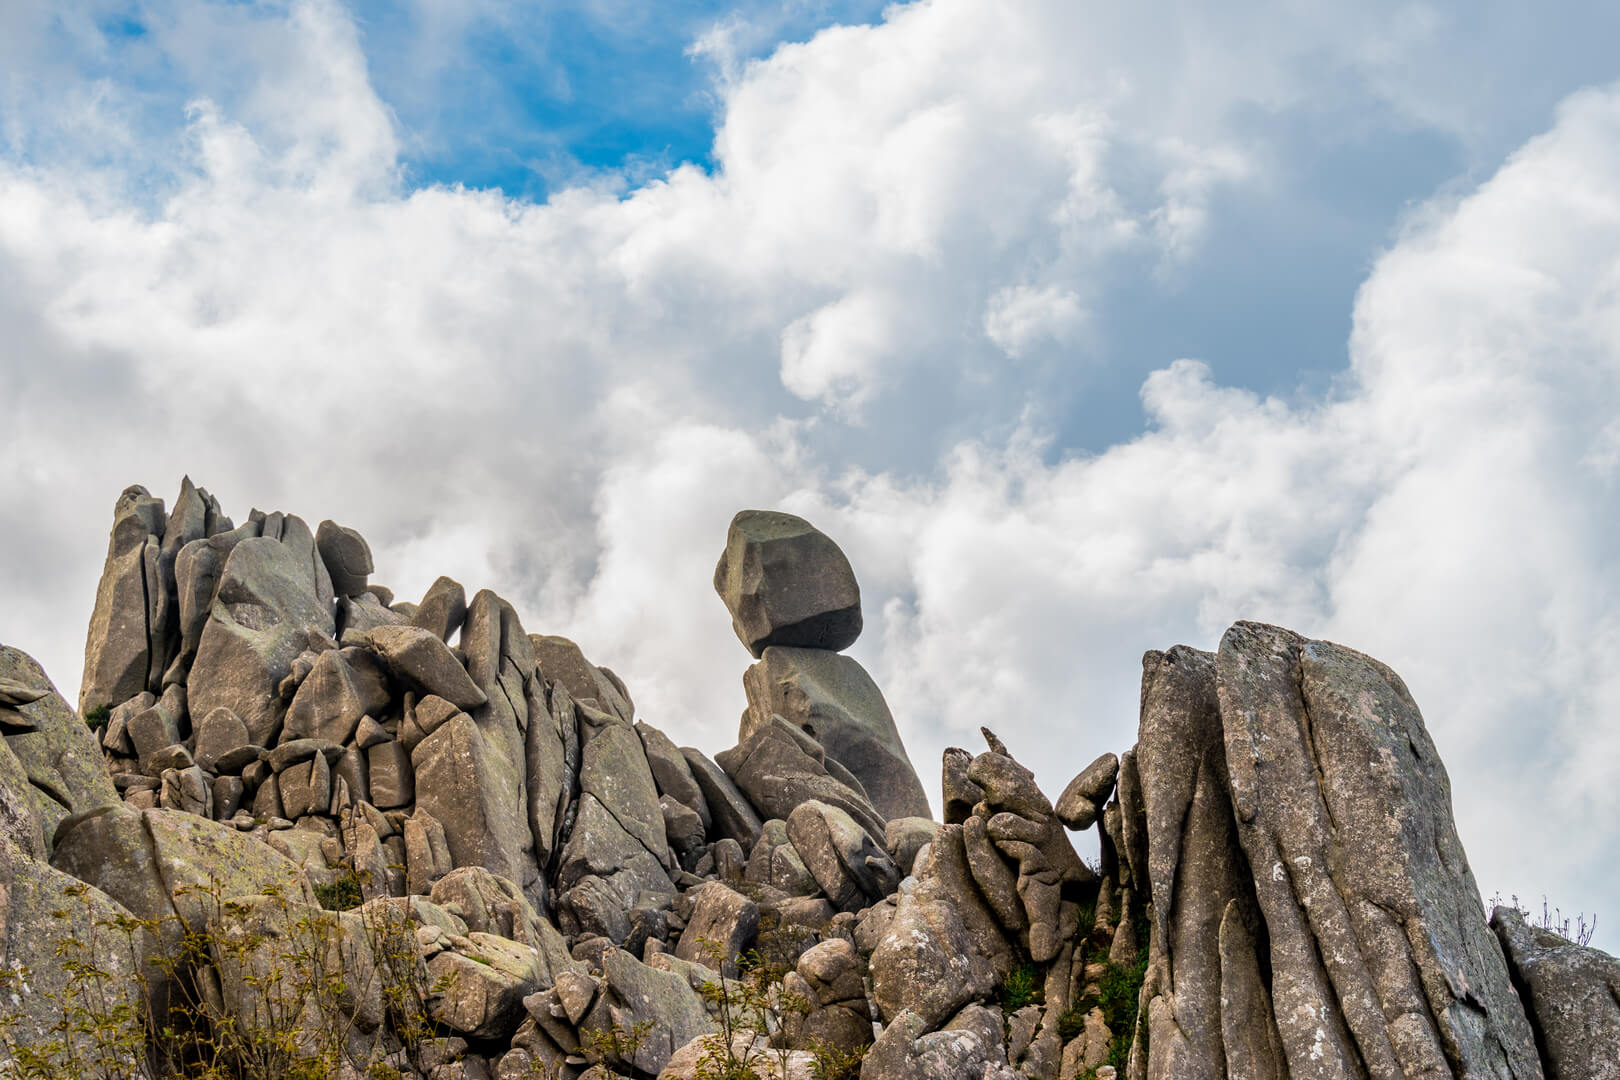 Closeup view of Omu di Cagna (Uomo di Cagna) on the island of Corsica. The granite rock is balanced at the top of a peak on the mountain of Cagna, surrounded by dramatic clouds and blue sky.